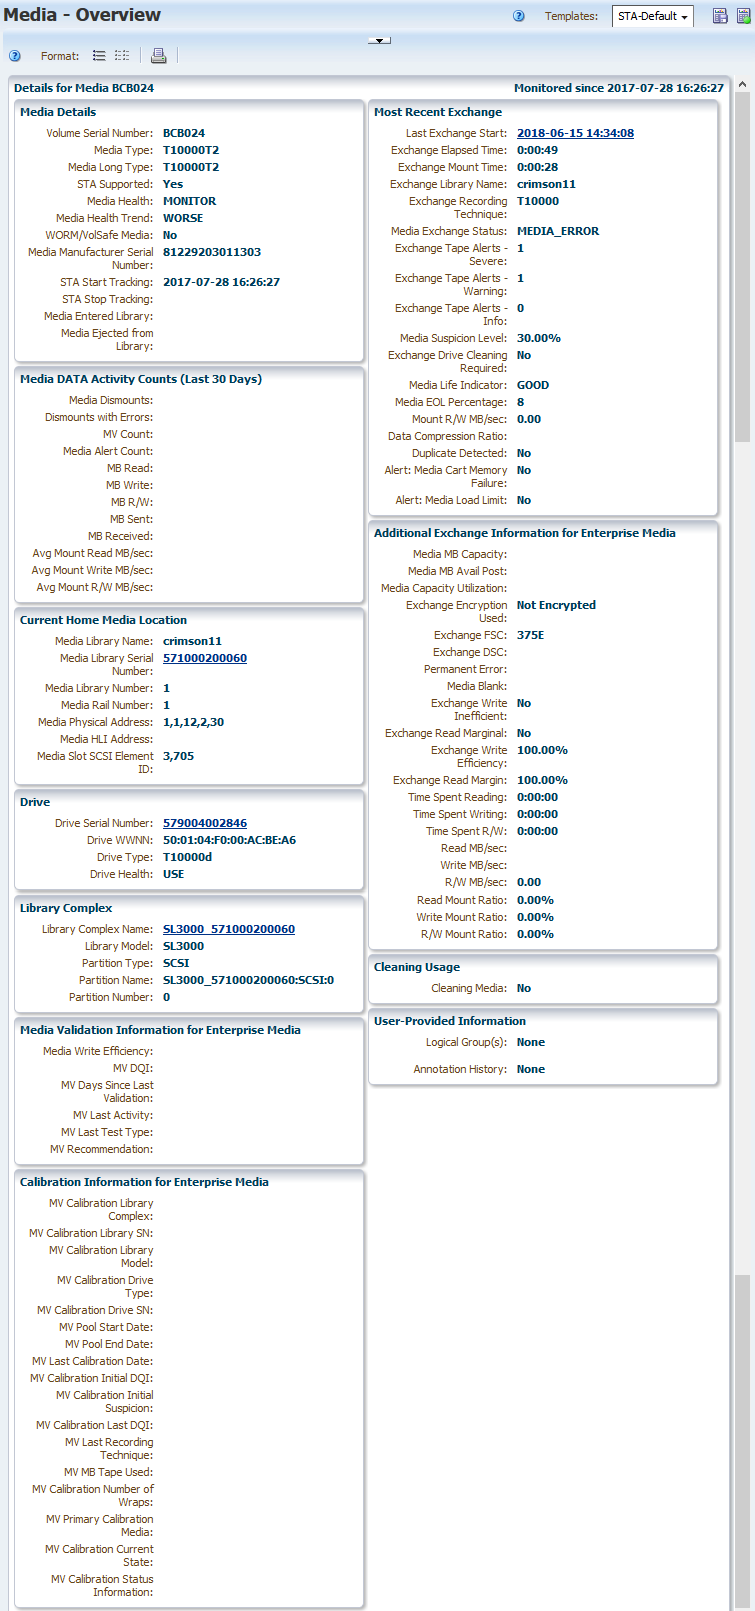 Example of Media Overview details page for enterprise media